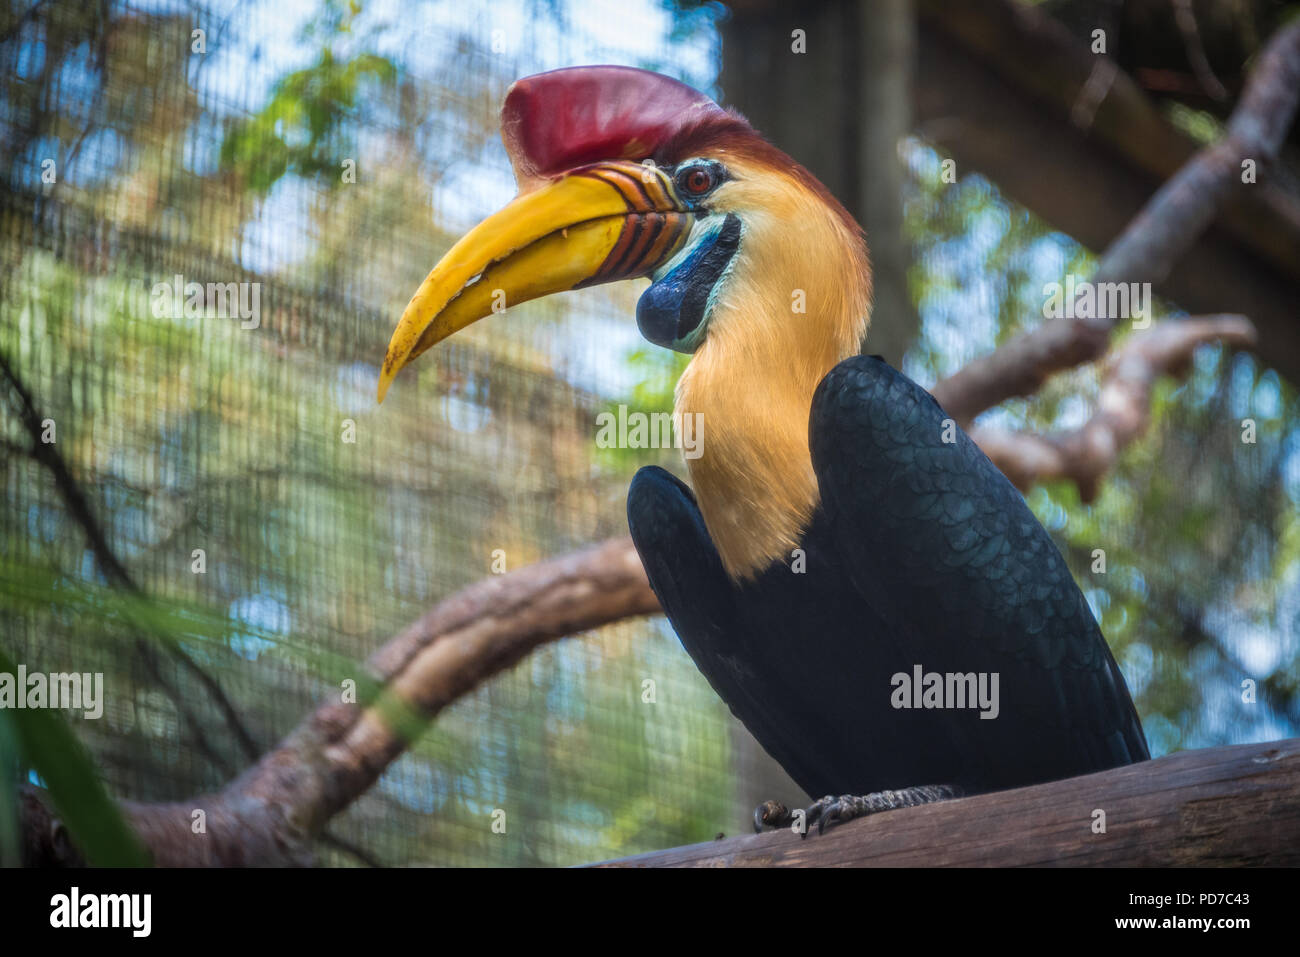 Colorful Sulawesi Red-Knobbed Hornbill (also known as Sulawesi wrinkled hornbill) at St. Augustine Alligator Farm Zoological Park in St. Augustine, Stock Photo